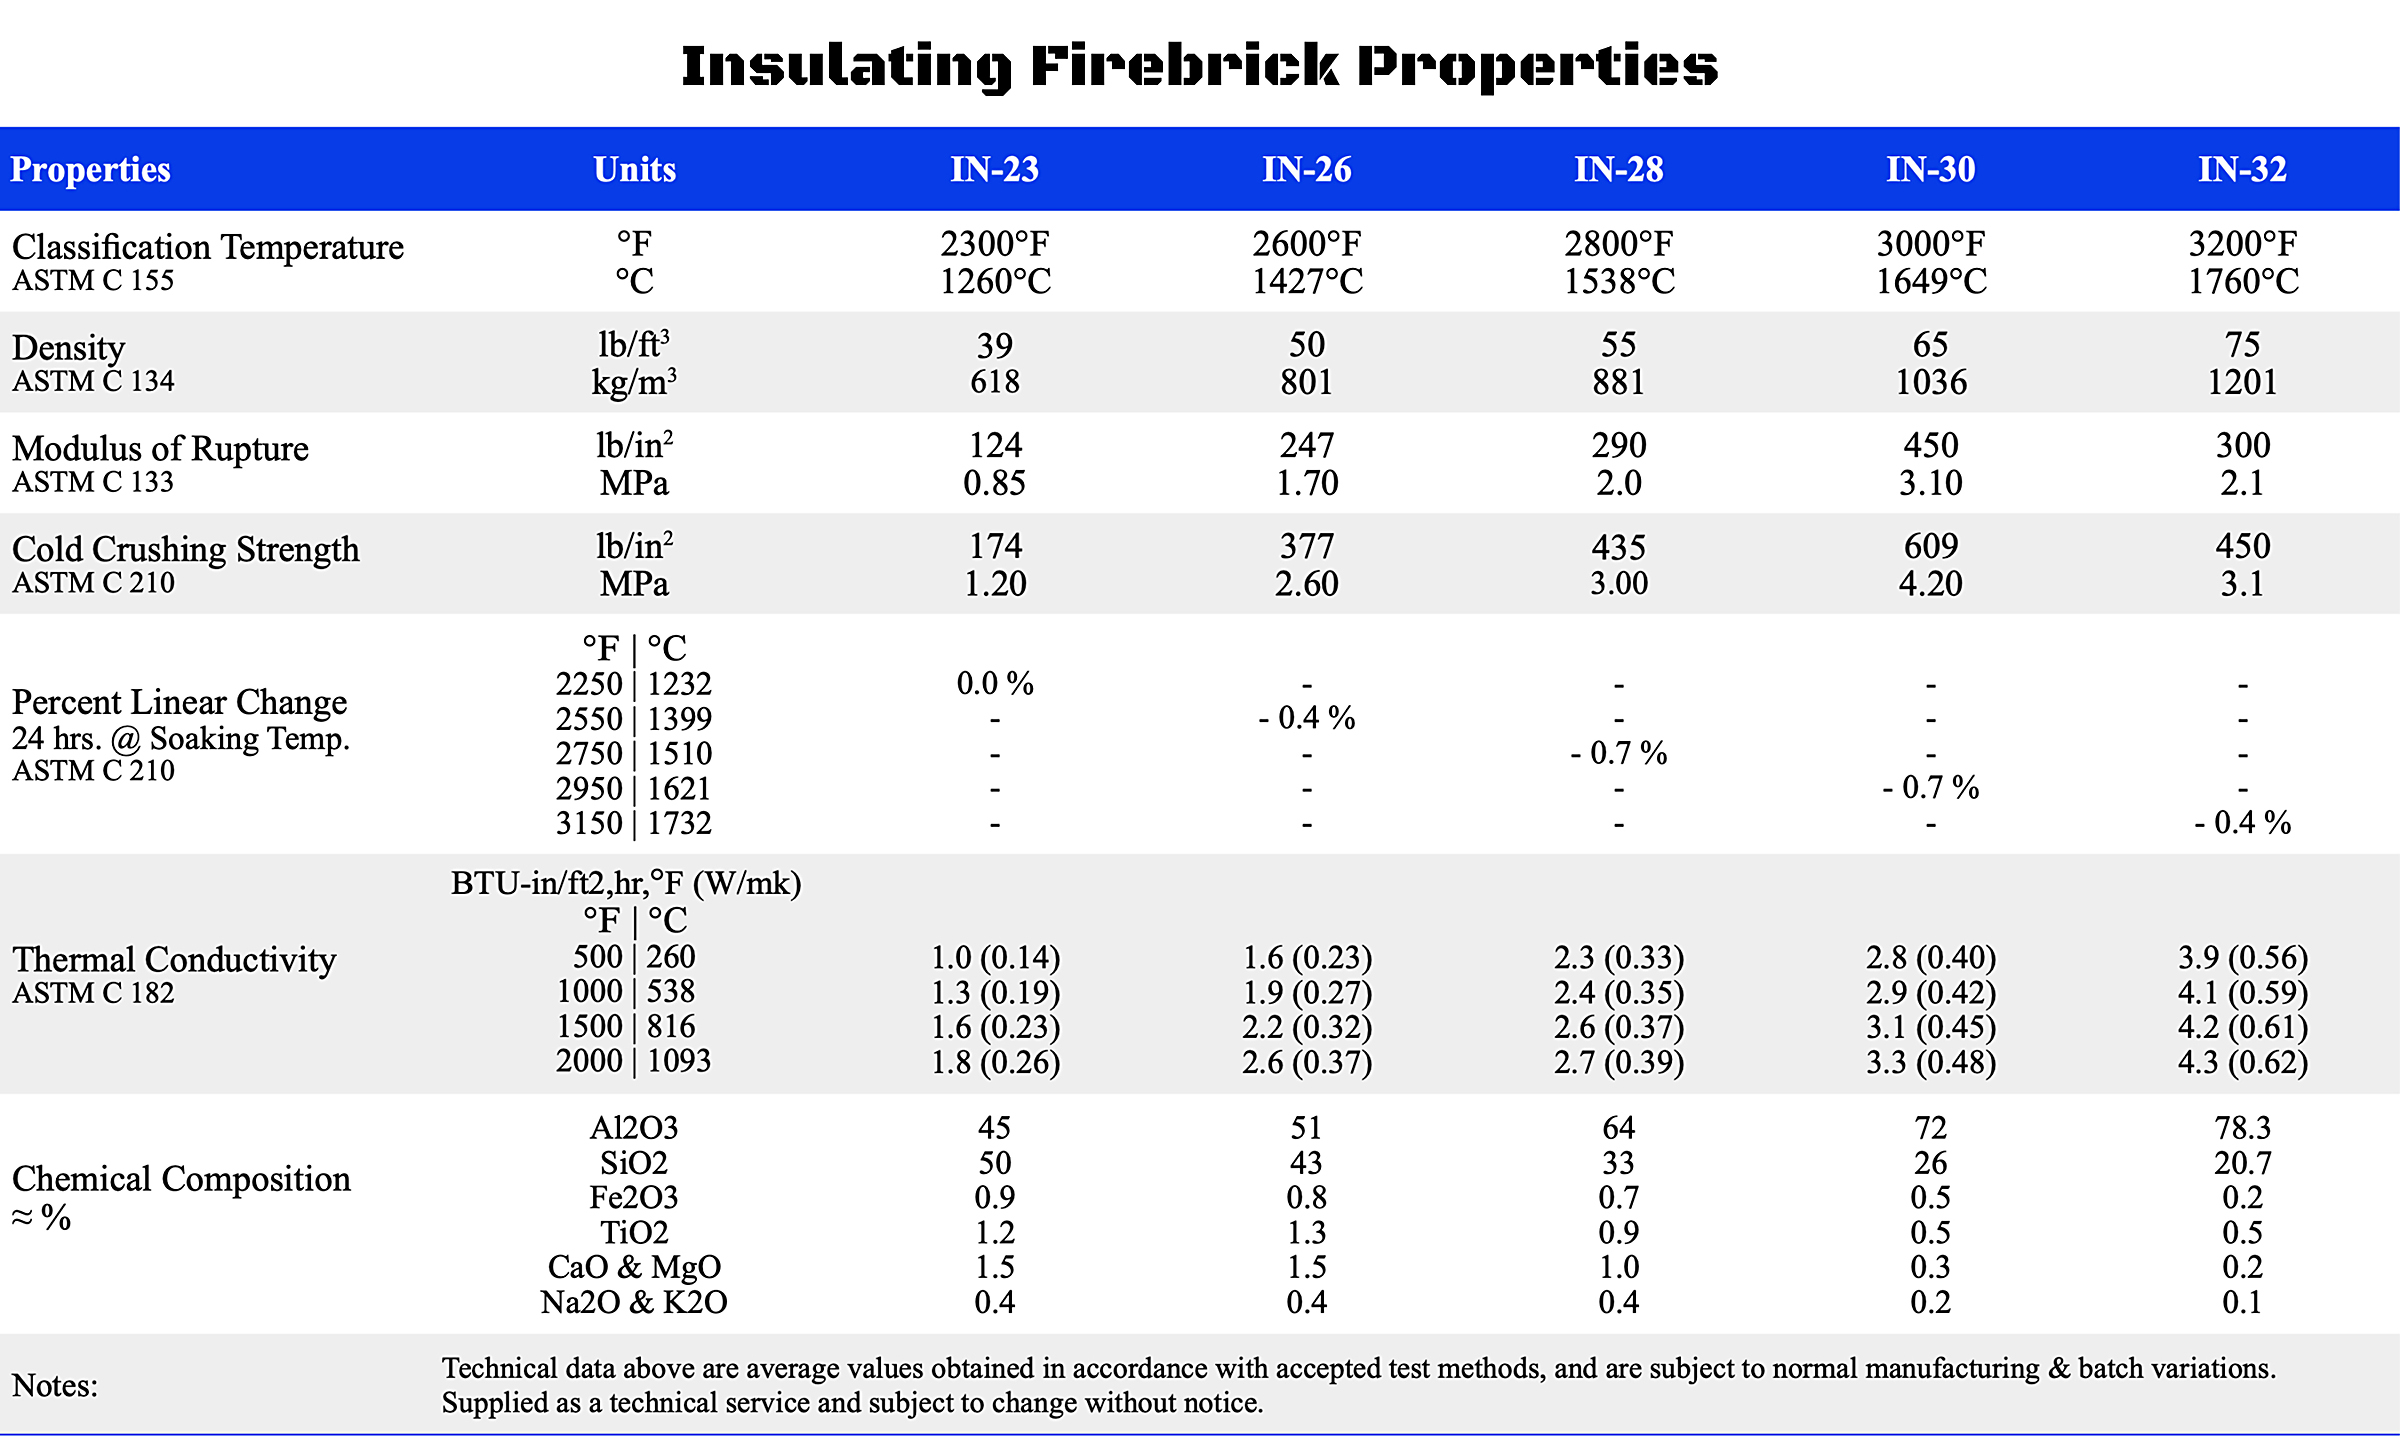 Refractory Brick Vs Fire Brick: What's the Difference